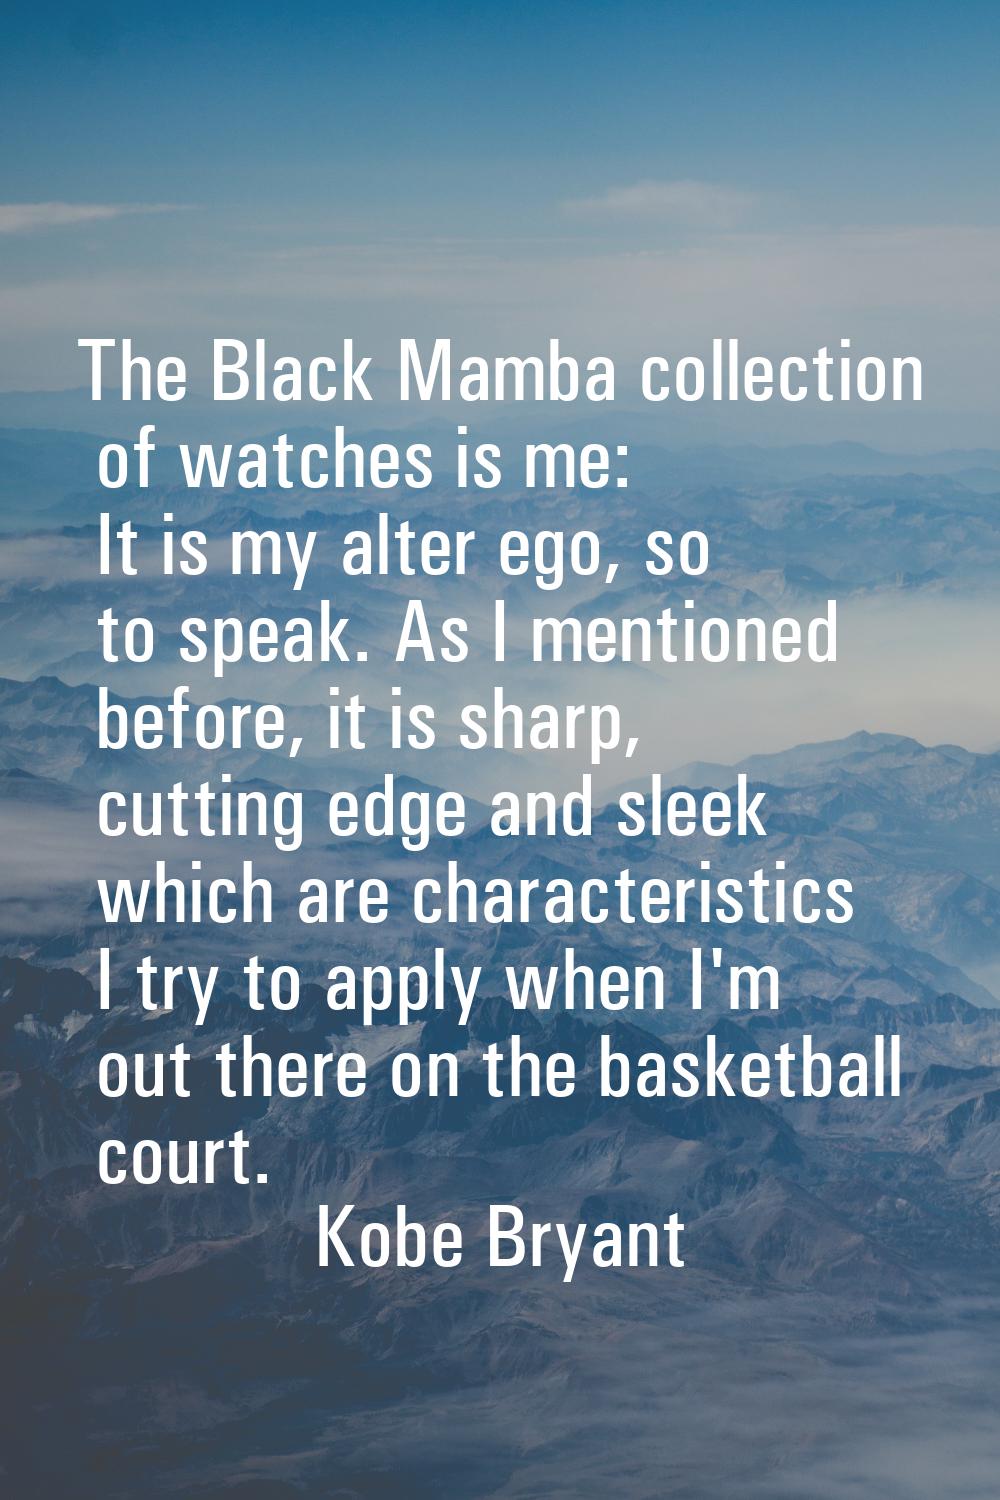 The Black Mamba collection of watches is me: It is my alter ego, so to speak. As I mentioned before